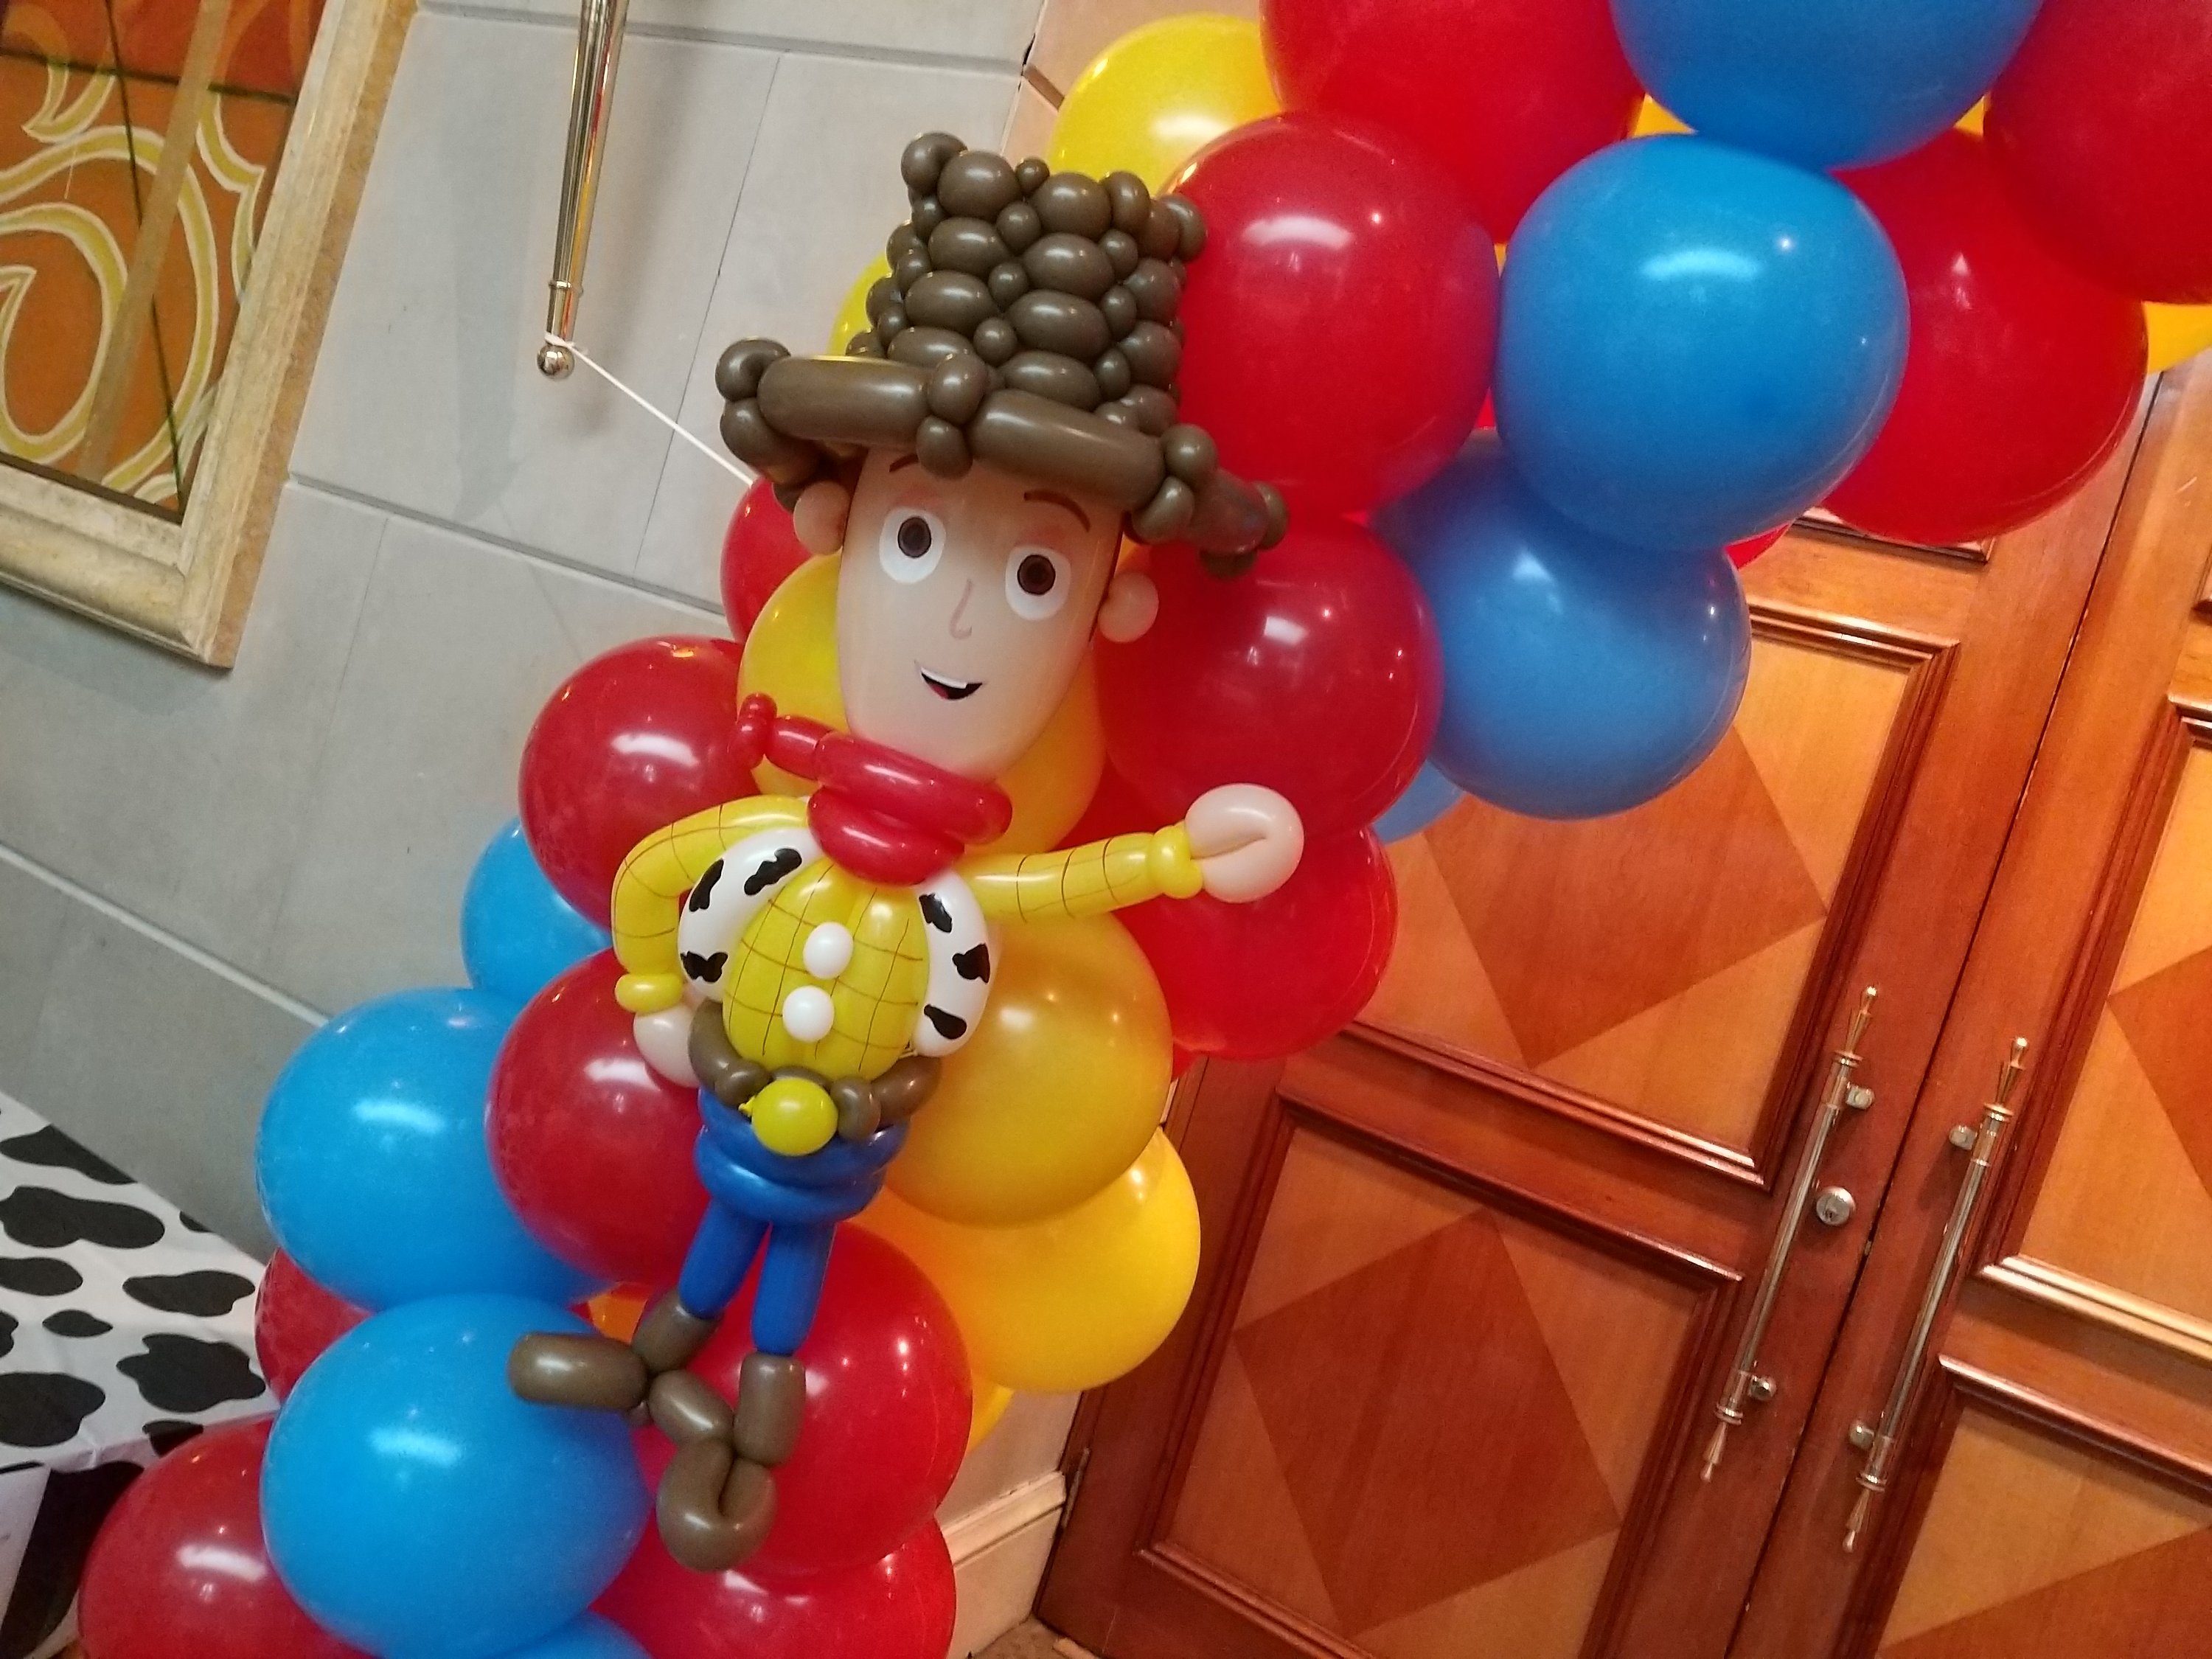 , Toy Story Themed Balloon Decorations, Singapore Balloon Decoration Services - Balloon Workshop and Balloon Sculpting